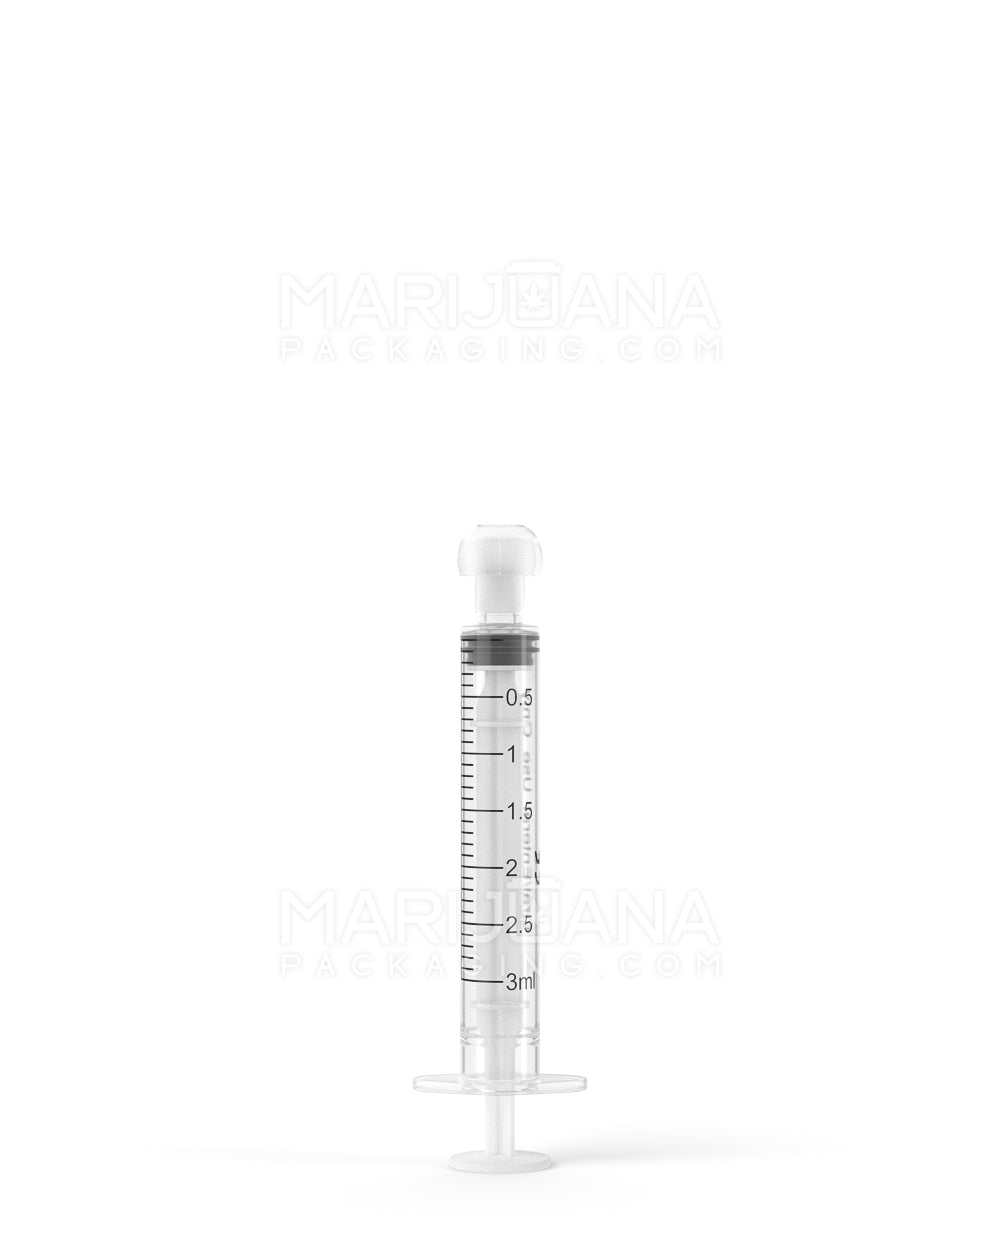 Plastic Oral Concentrate Syringes | 3mL - 0.5mL Increments | Sample - 8